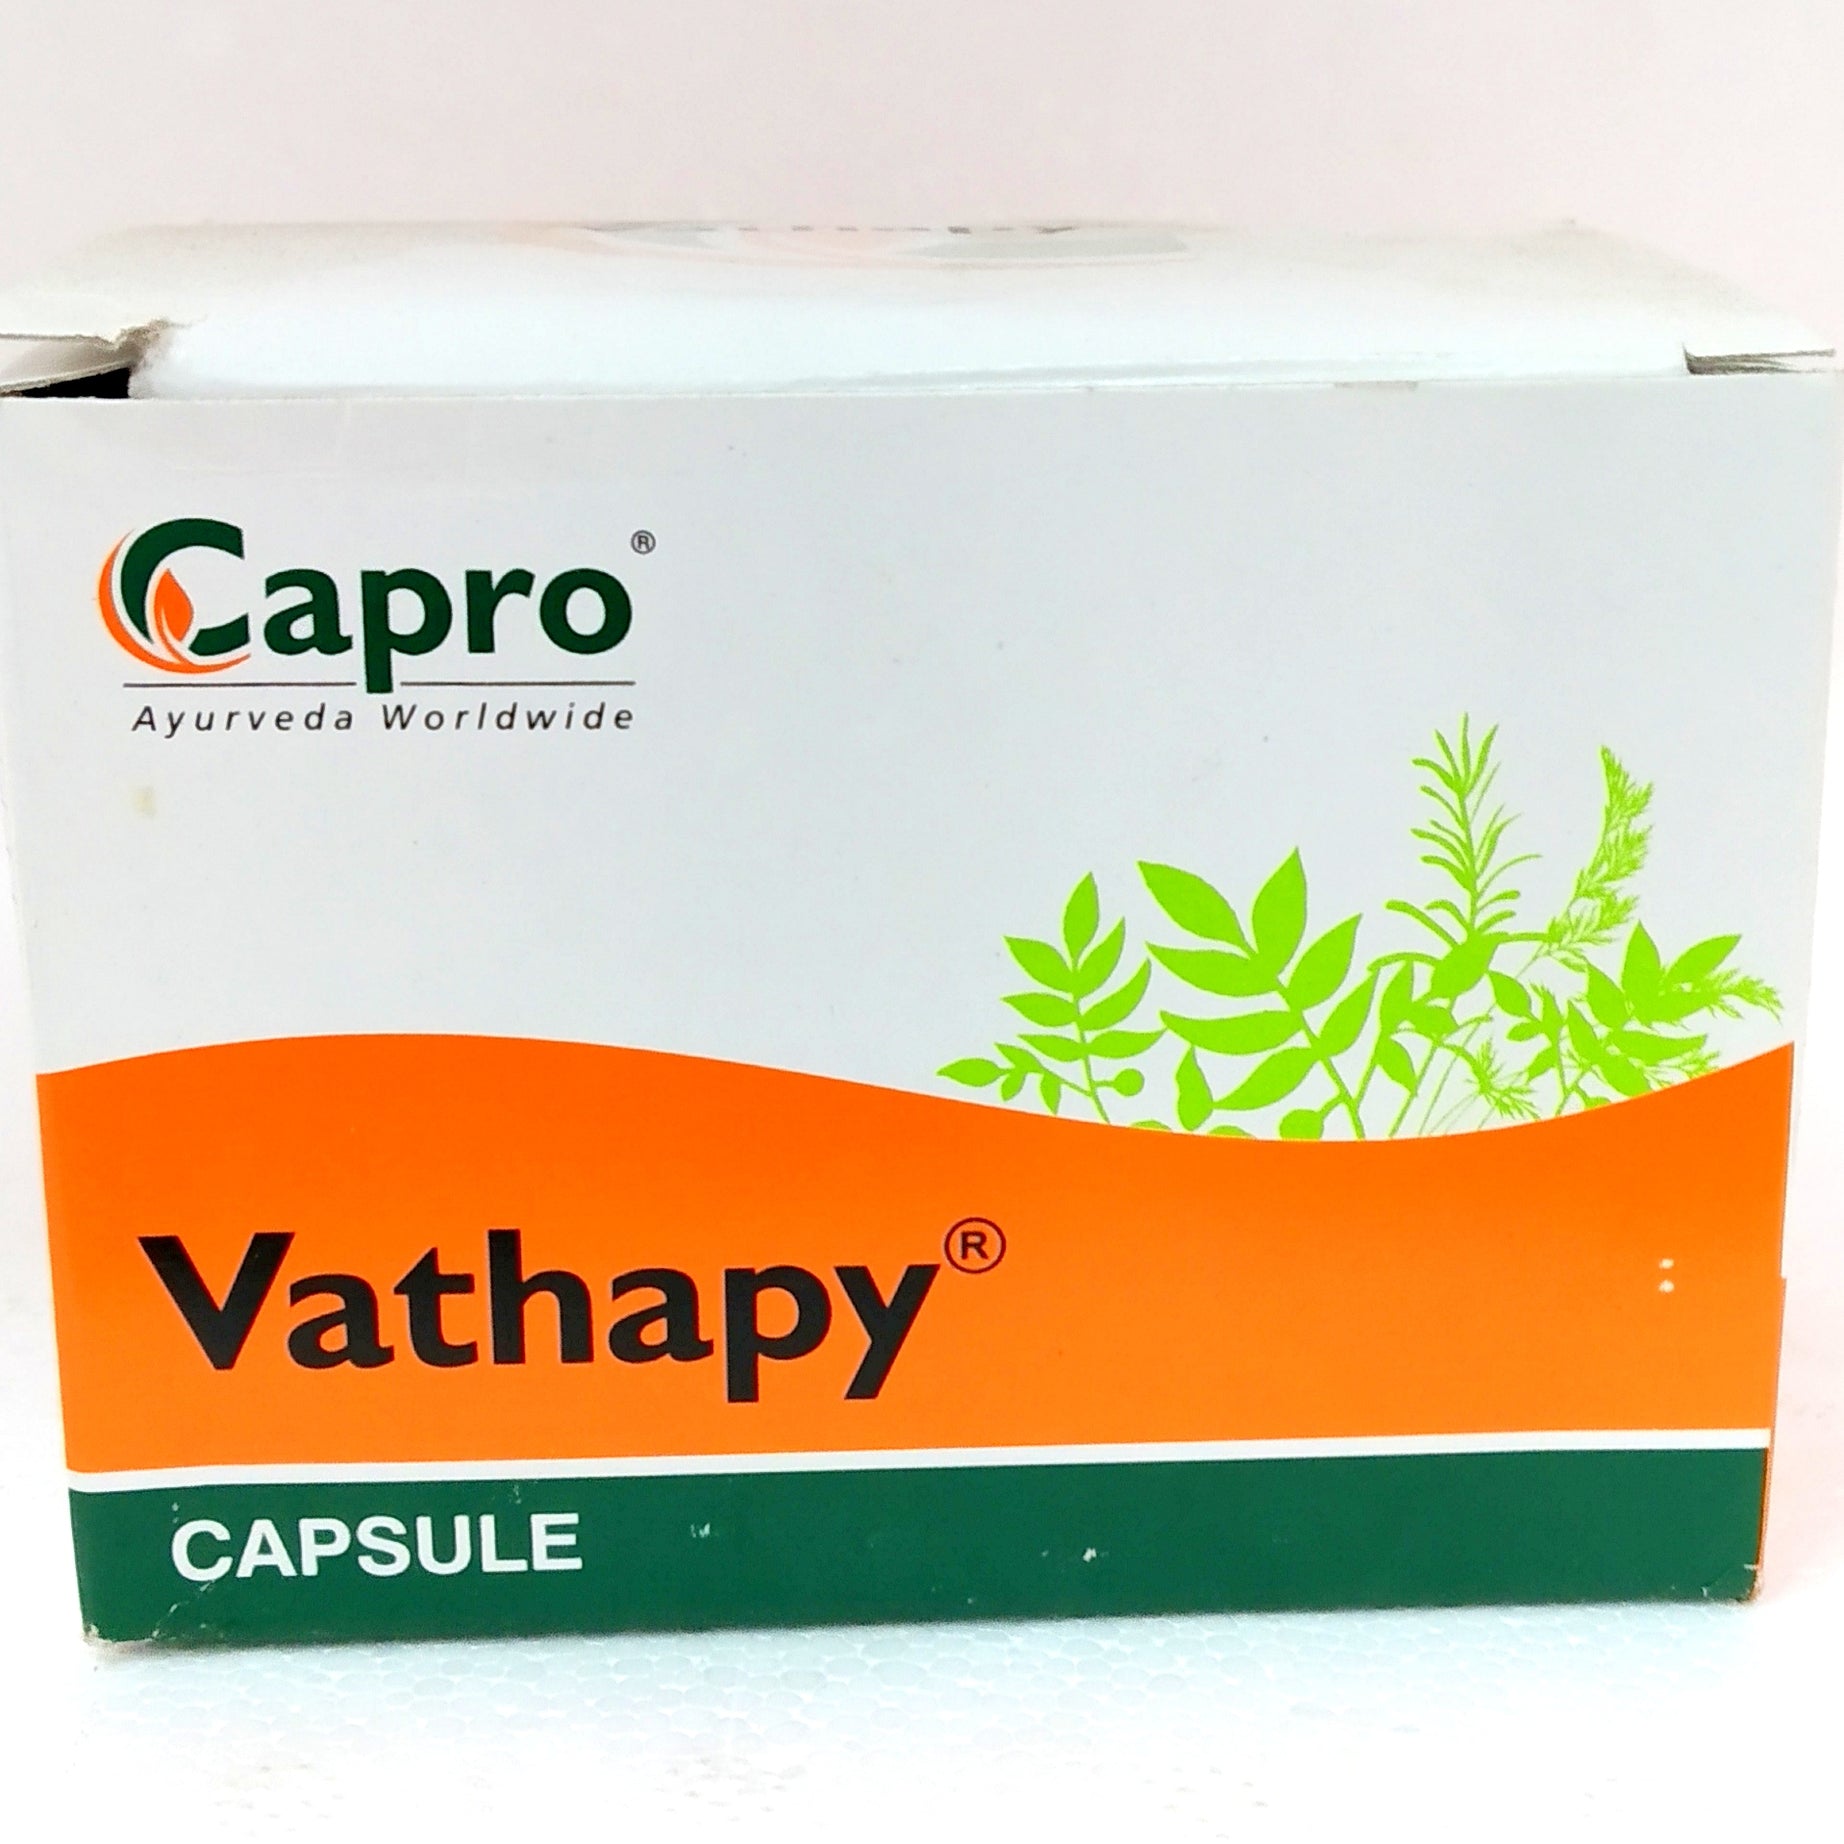 Shop Capro Vathapy 10Capsules at price 73.80 from Capro Online - Ayush Care